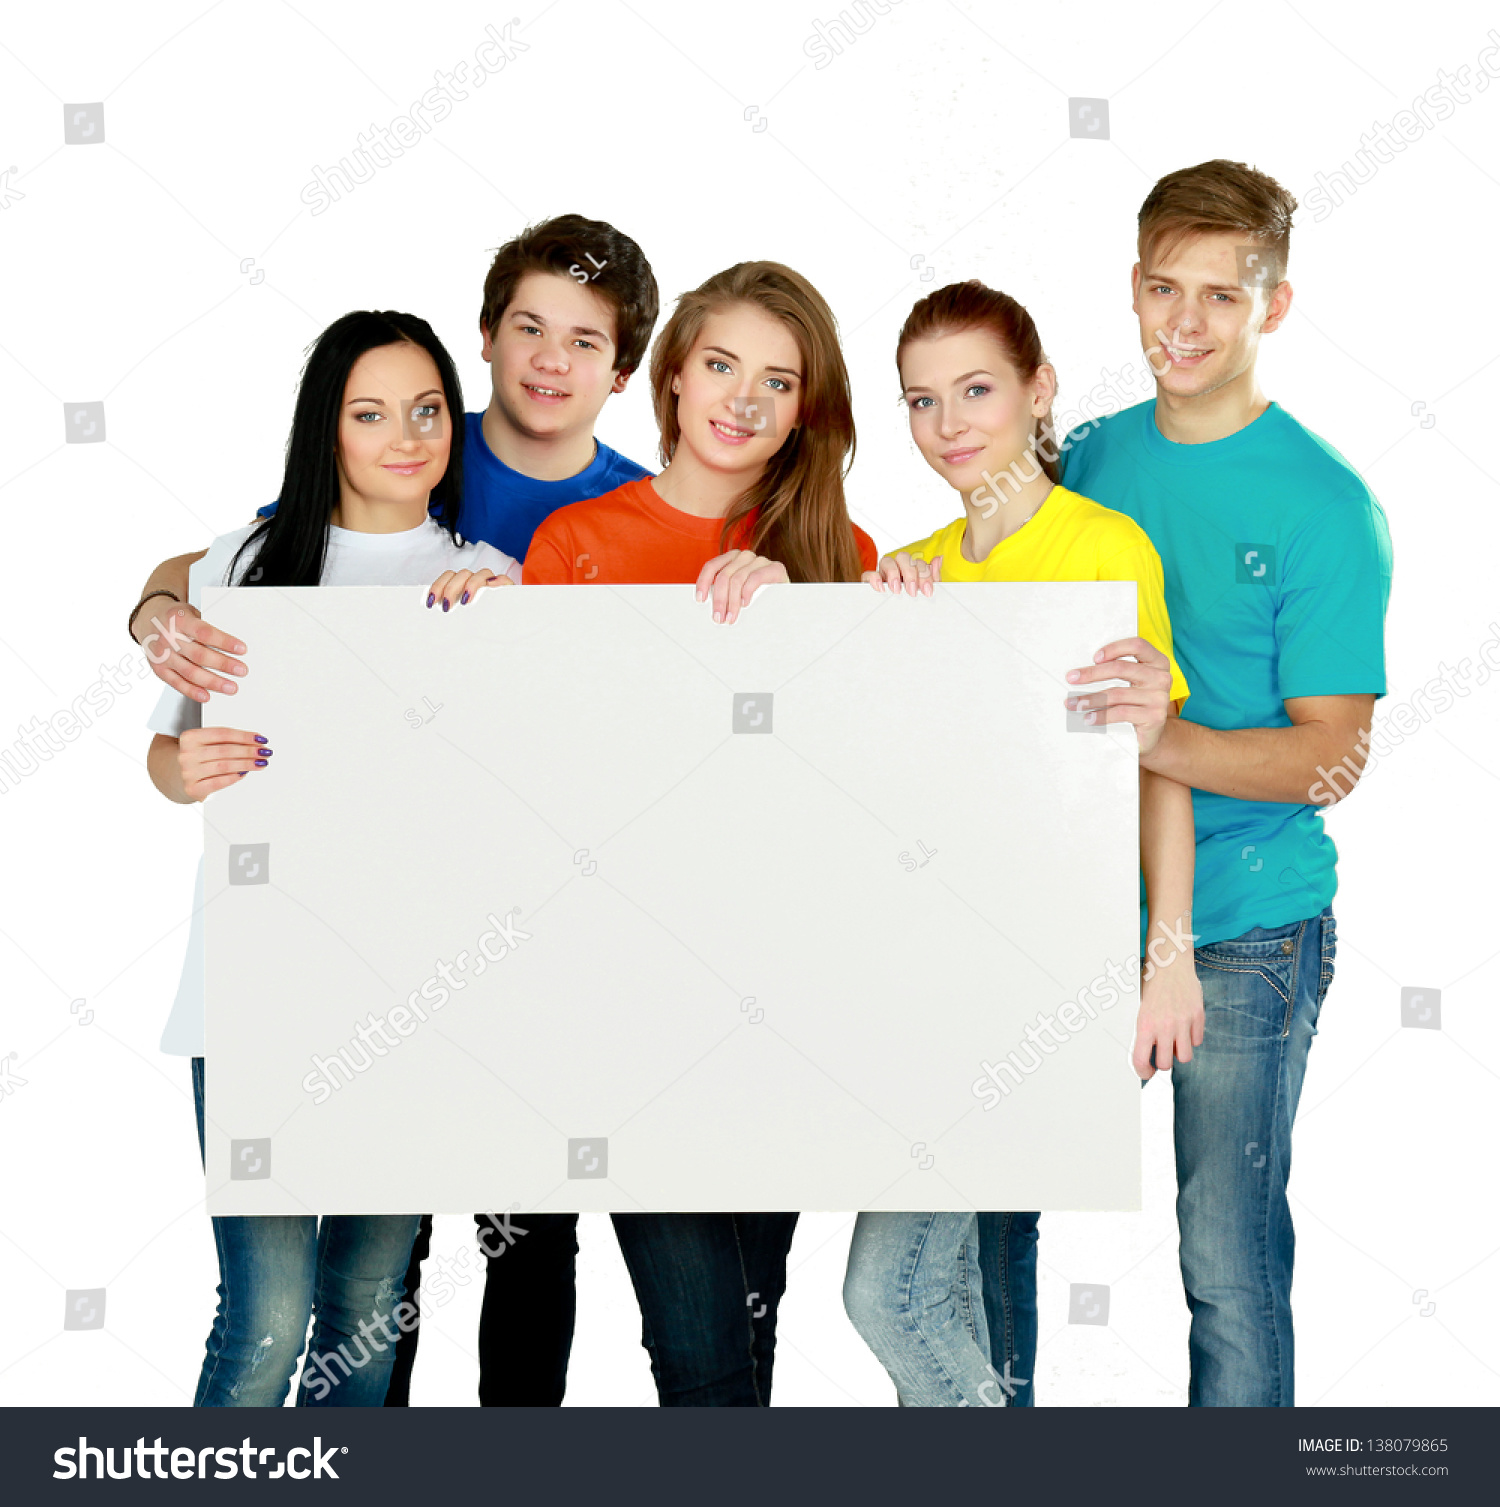 Group Of Young Friends Holding A Blank Board, Isolated On White ...